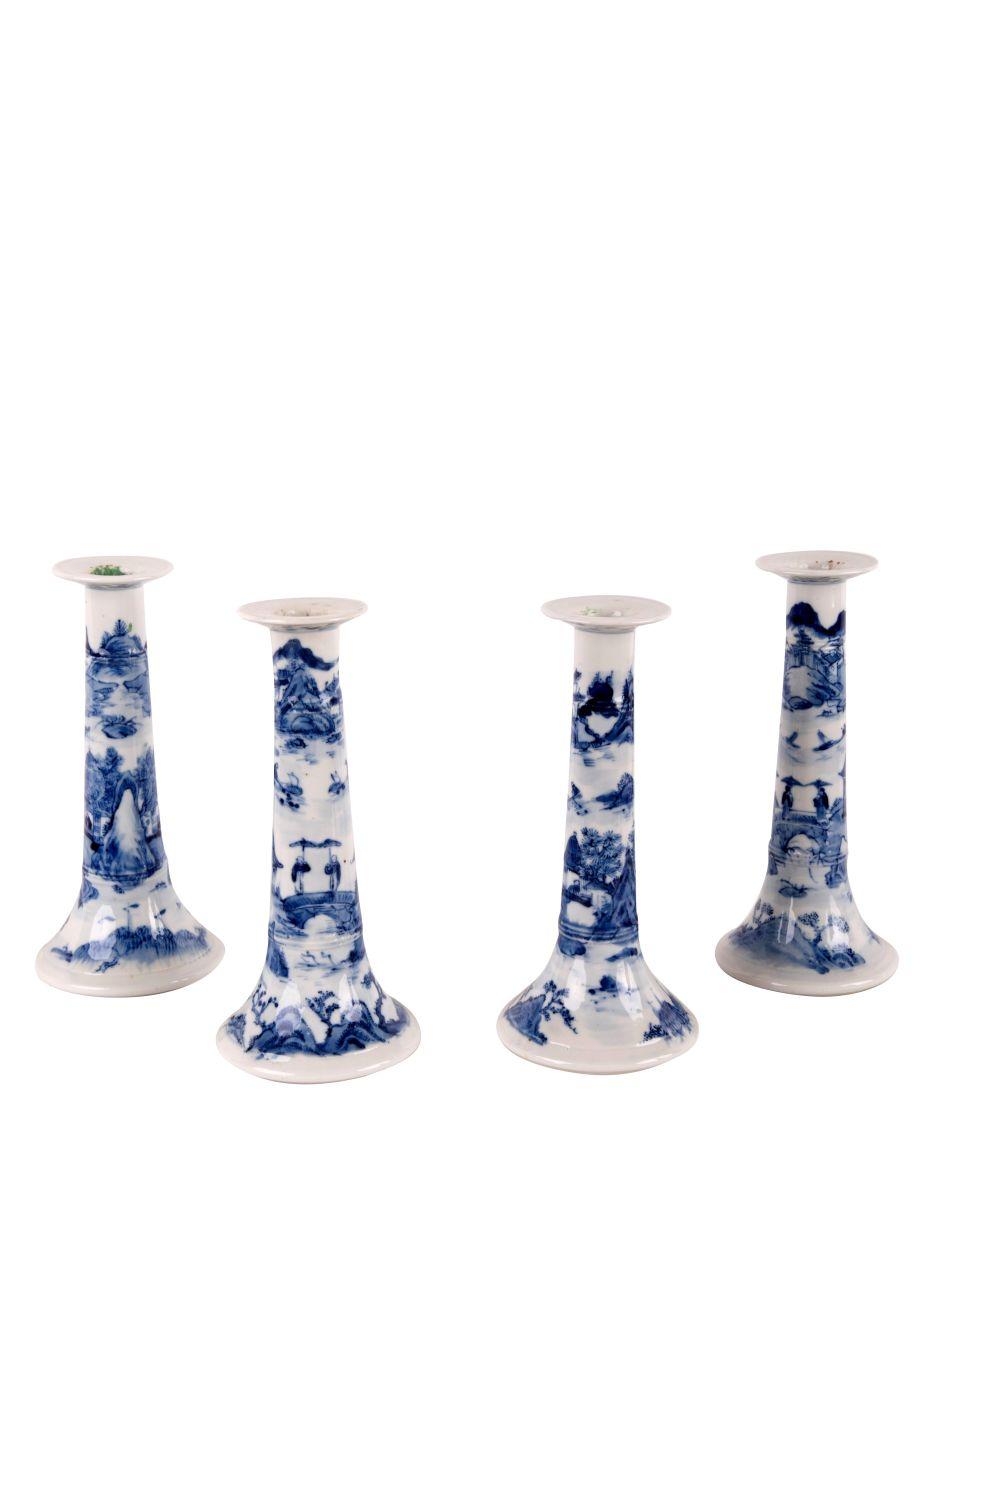 FOUR CHINESE BLUE WHITE EXPORT 335948